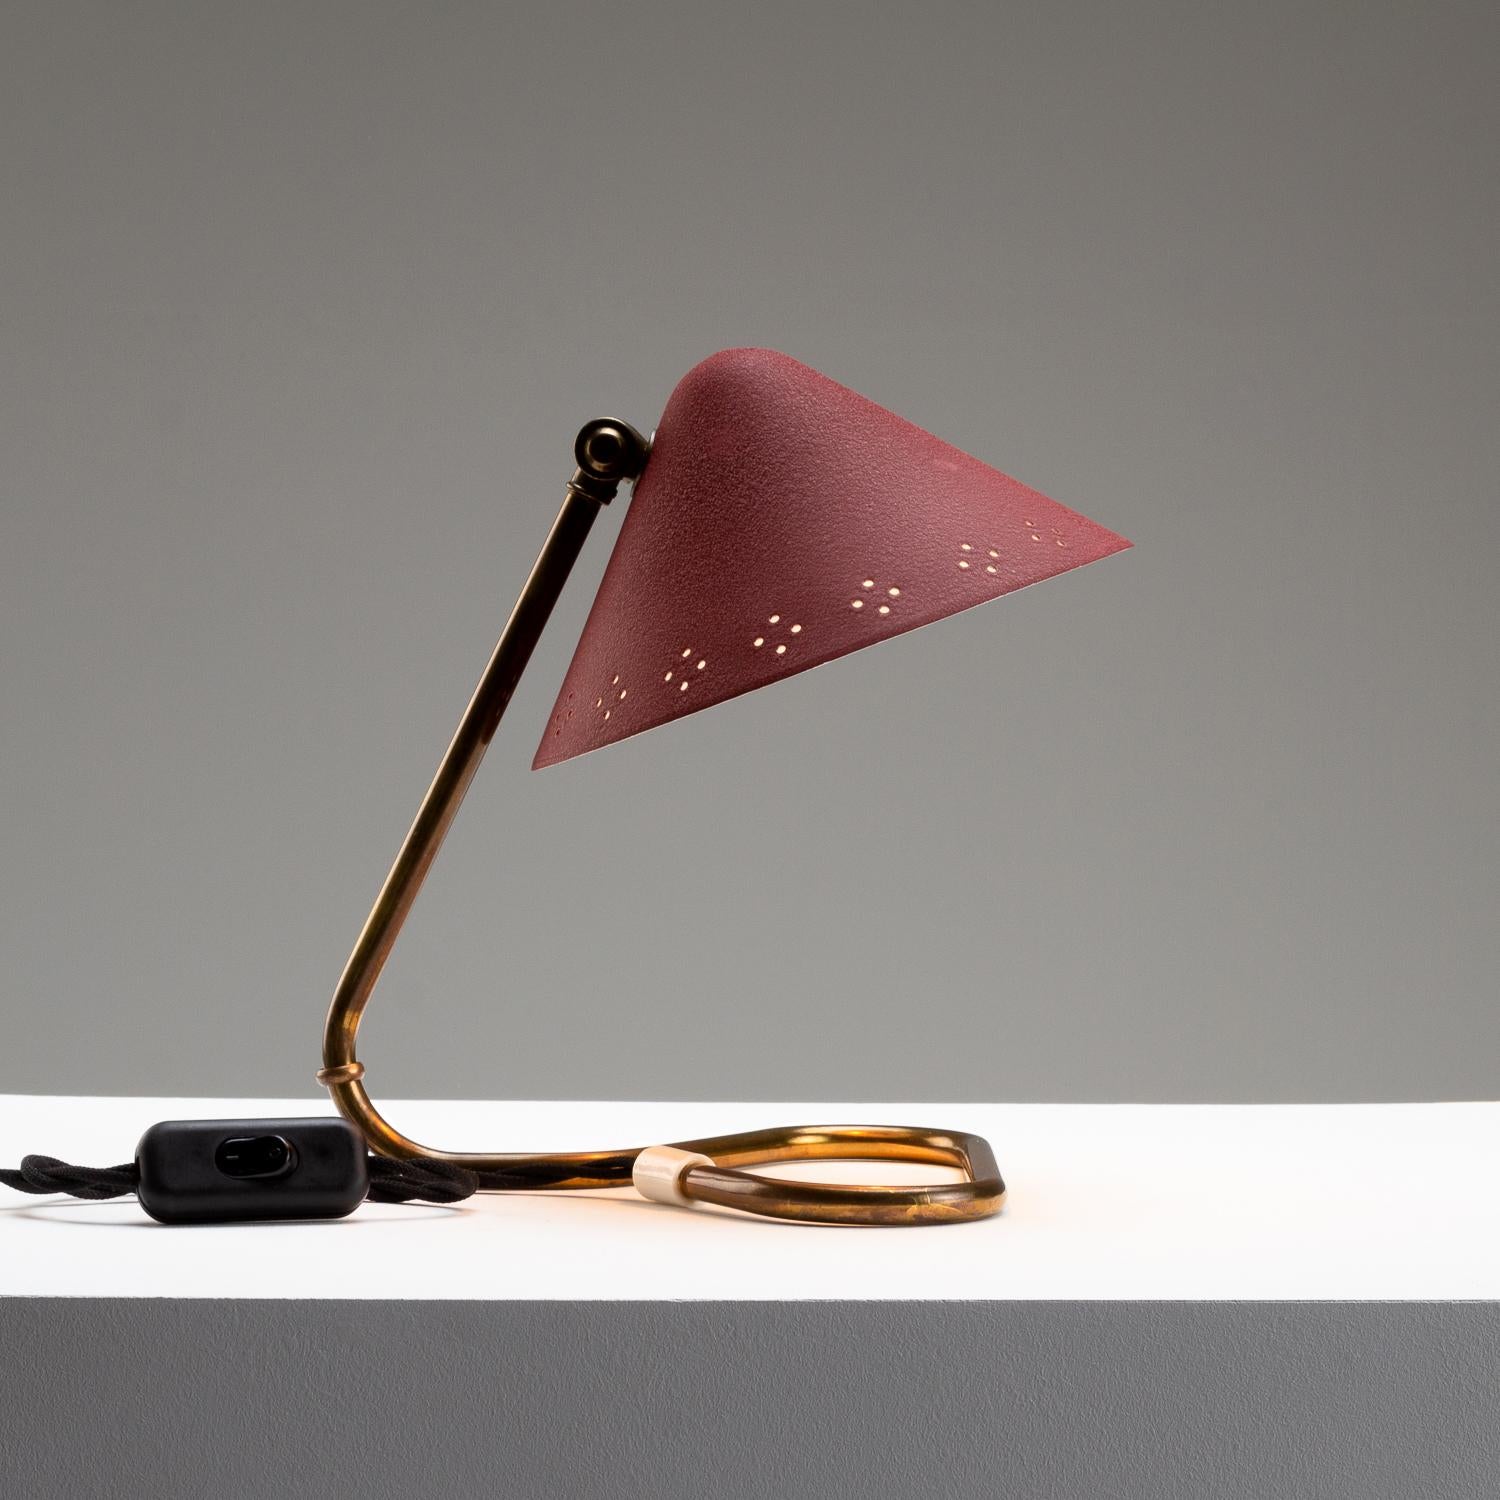 Swedish Red Lacquered Aluminium and Brass Table Lamp by Gnosjö Konstsmide, Sweden, 1950s For Sale